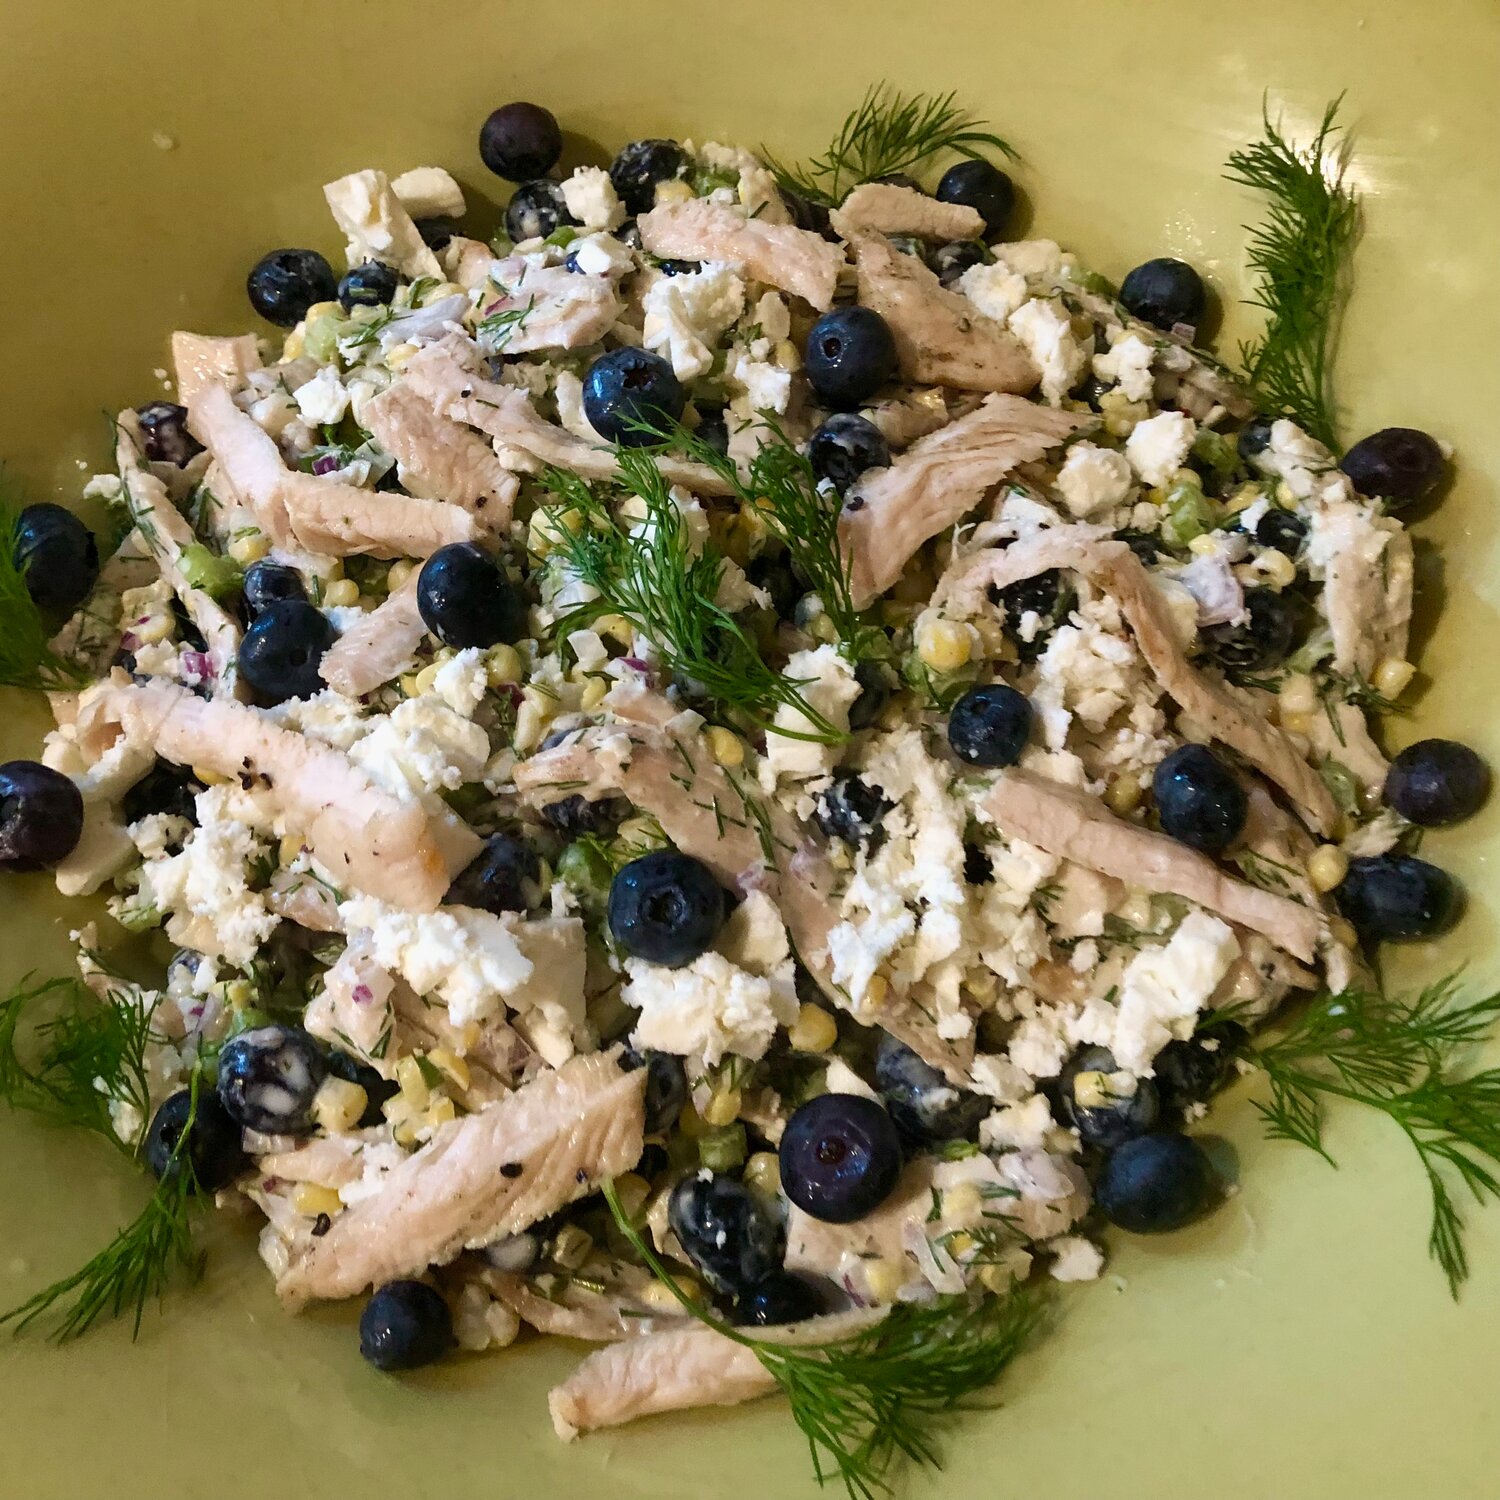 This Grilled Chicken with Feta, Fresh Corn and Blueberries was created by the Food Network’s “Pioneer Woman” Ree Drummond.